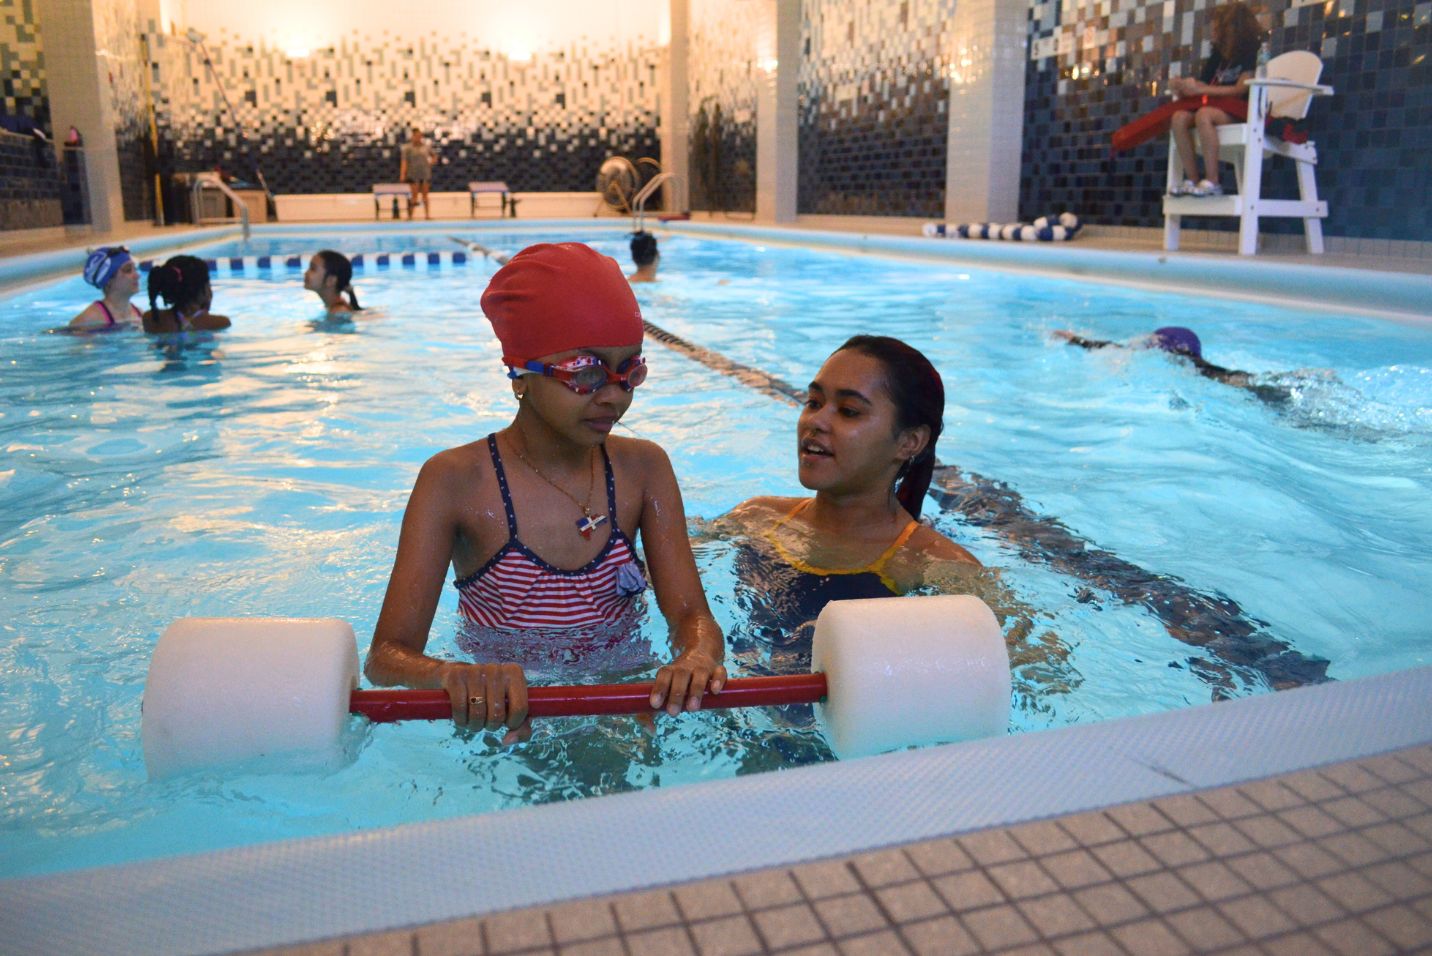 A young woman is teaching a young girl how to swim.